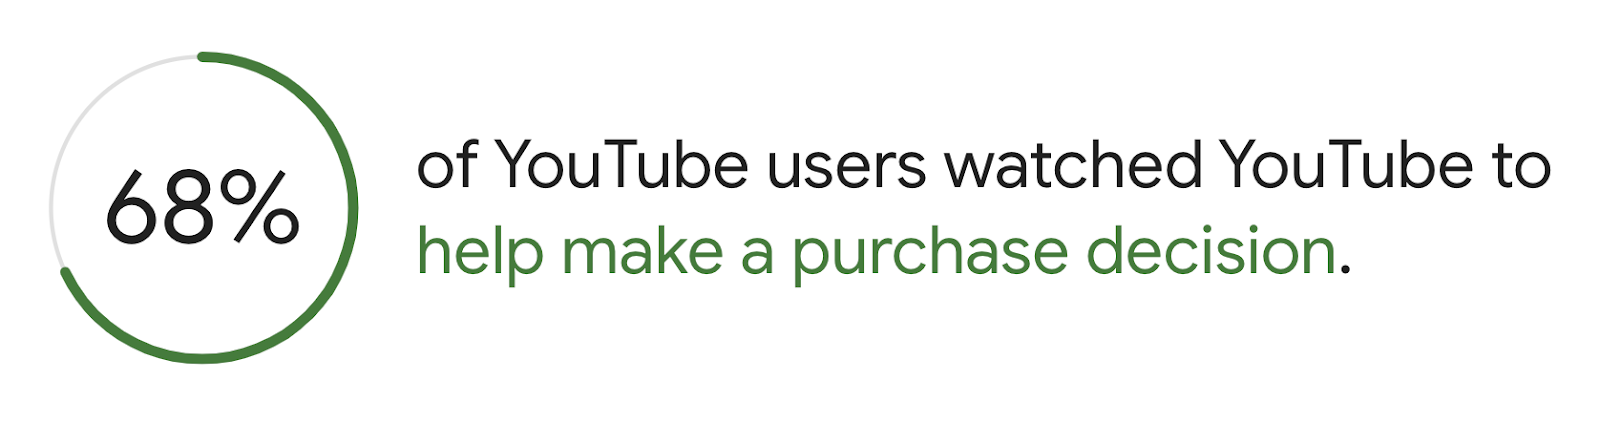 Google survey's data showed that 68% of YouTube users used it to help them make purchase decisions